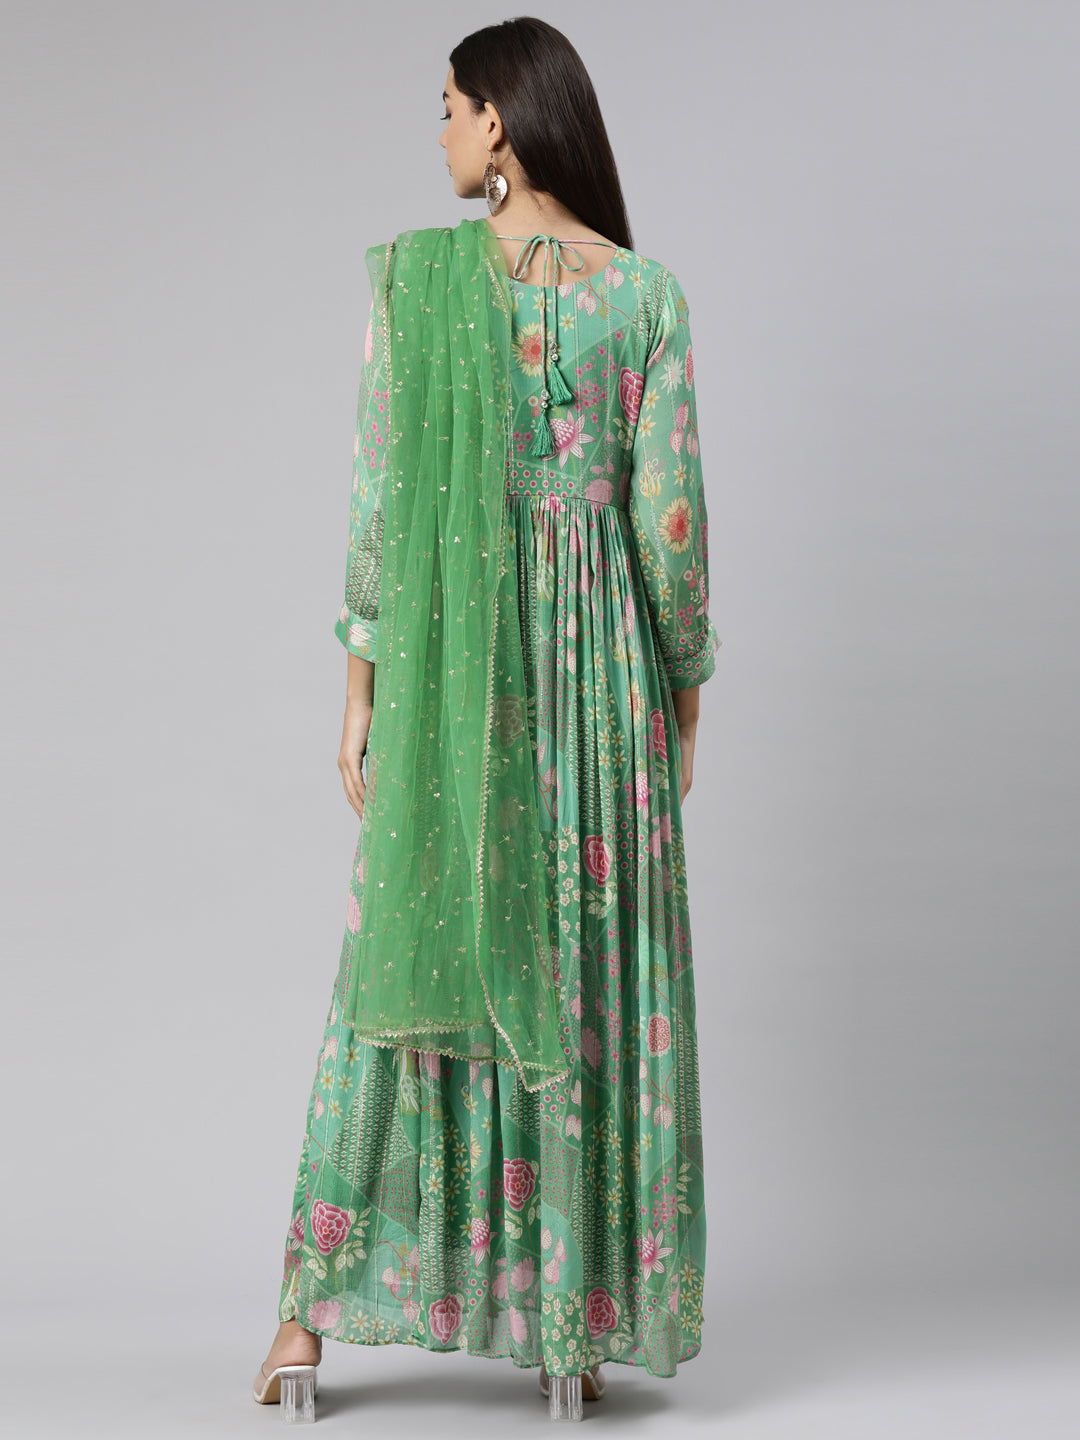 Neeru's Green Flared Casual Floral Dresses